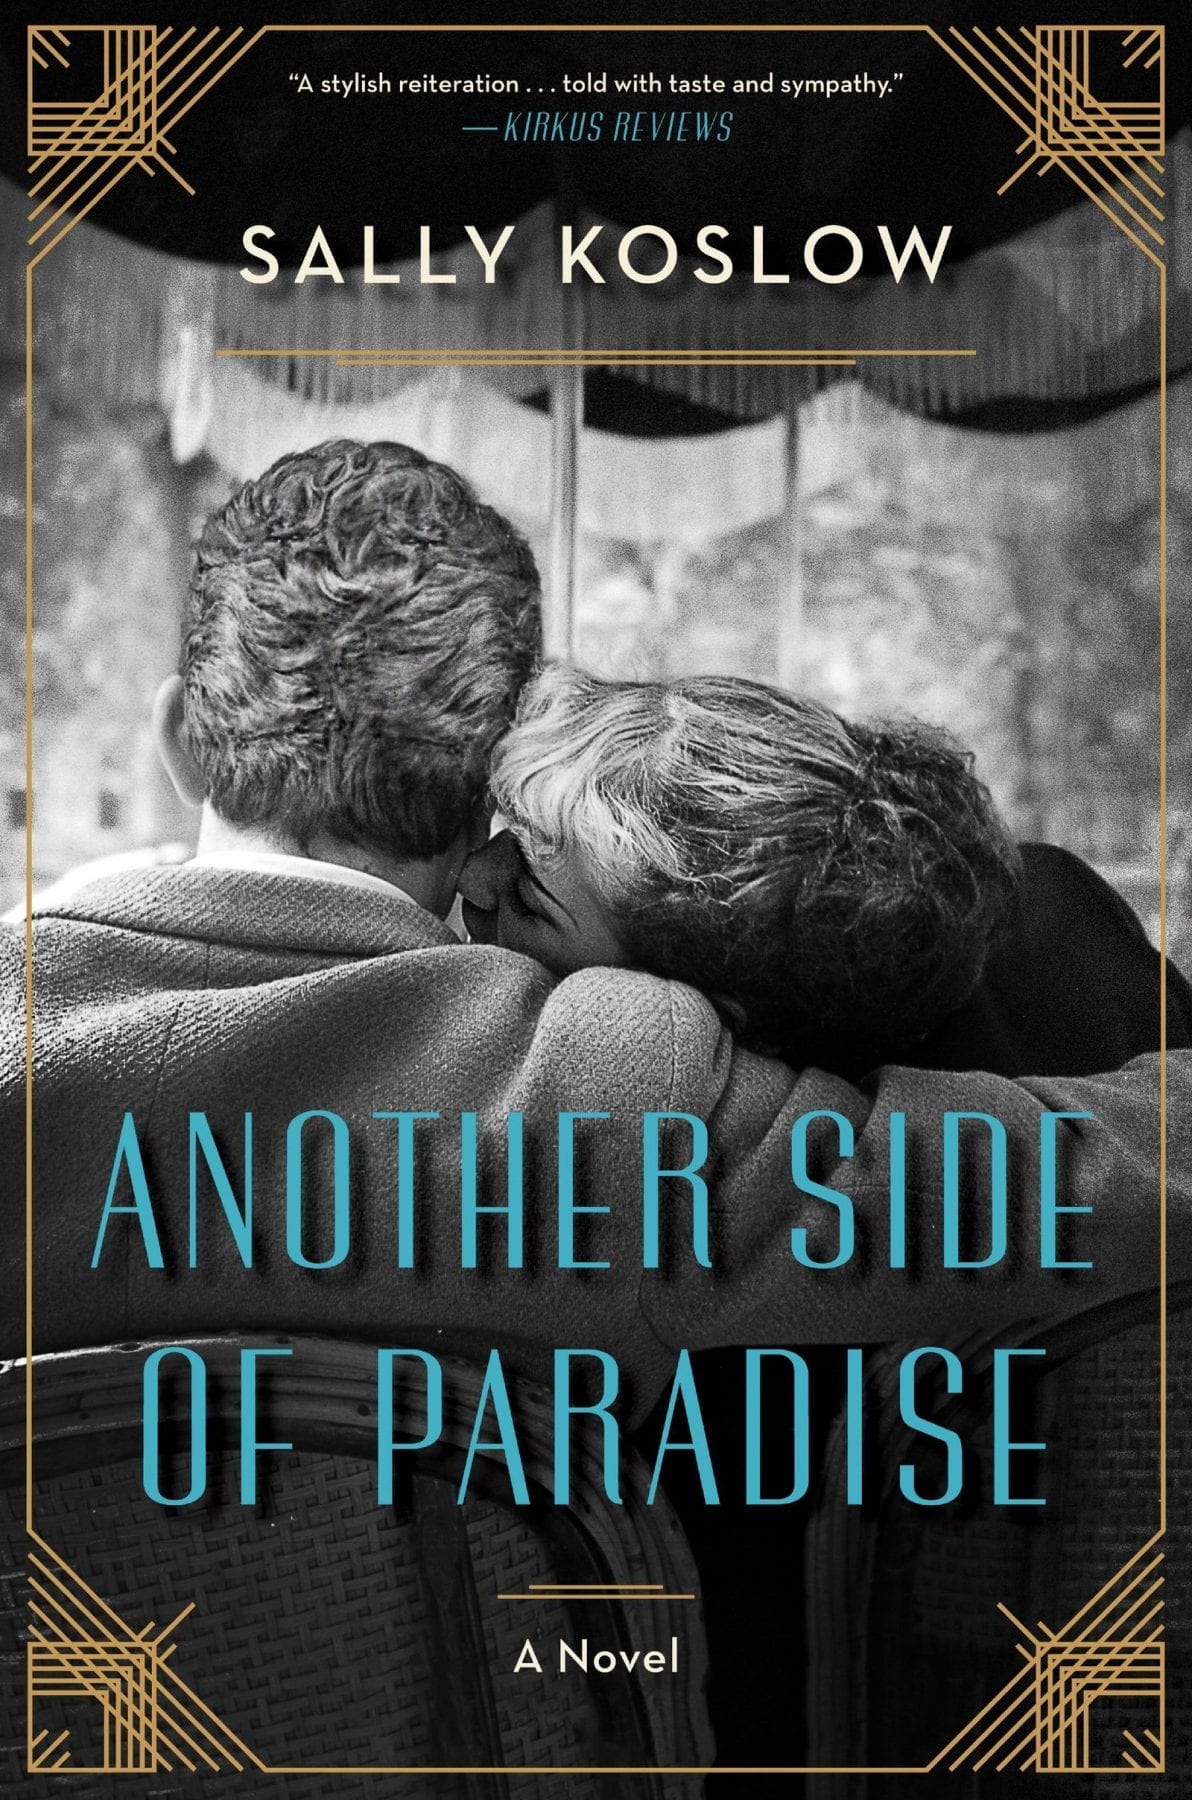 Another Side of Paradise by Sally Koslow